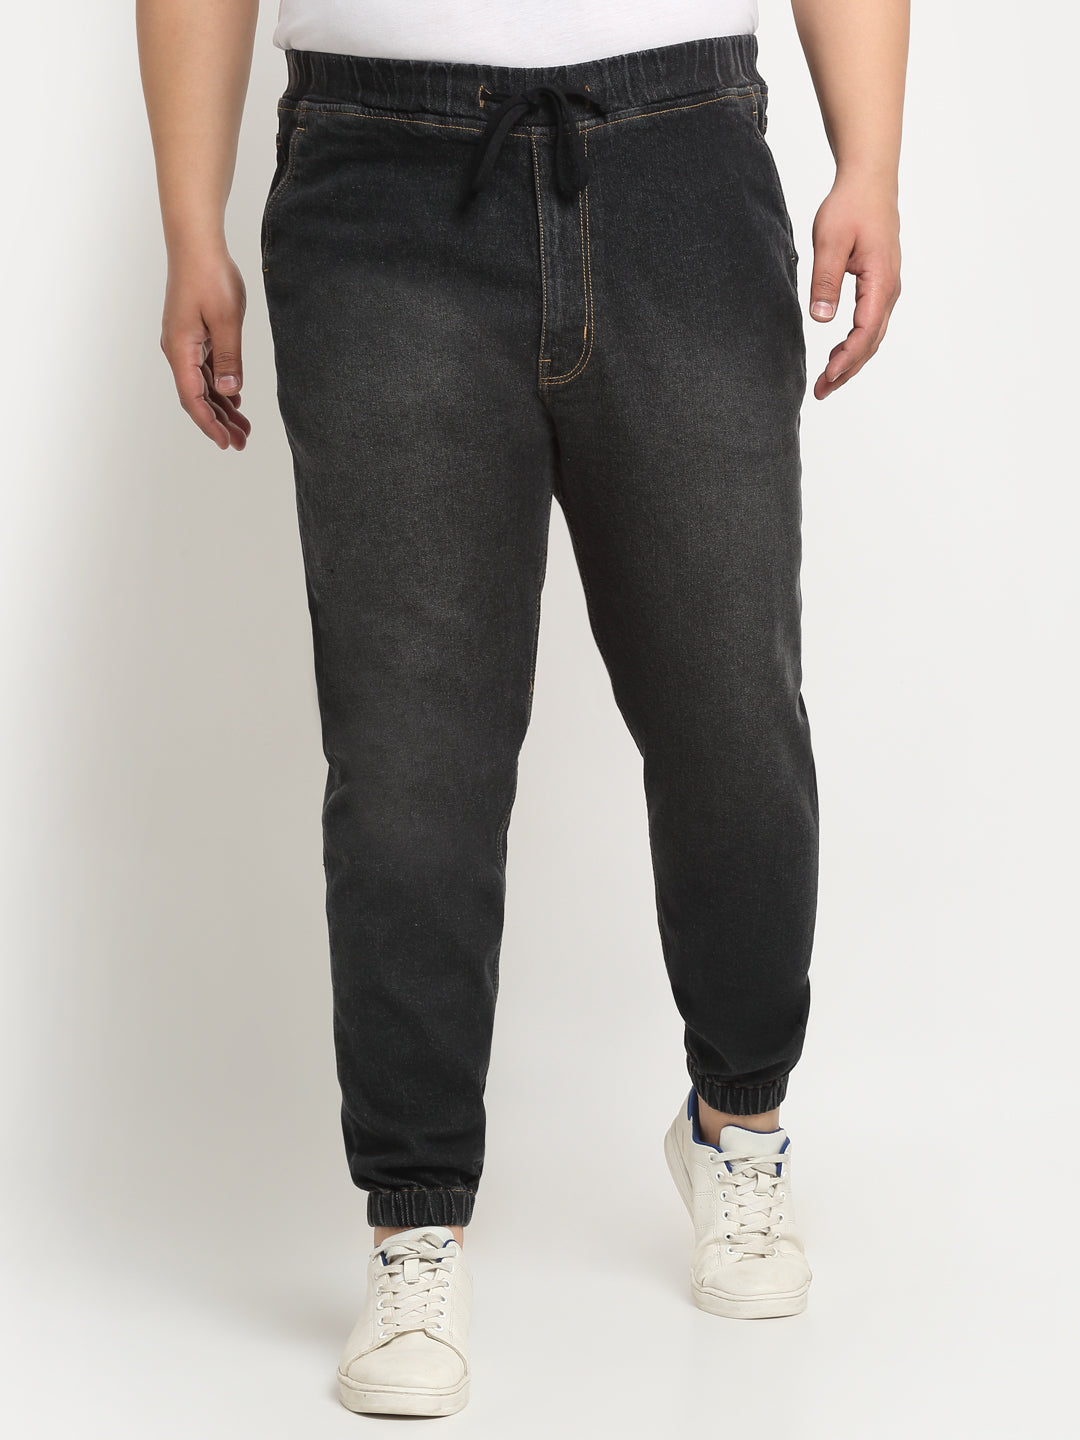 Joggers For Men - Buy Joggers For Men online in India | Myntra